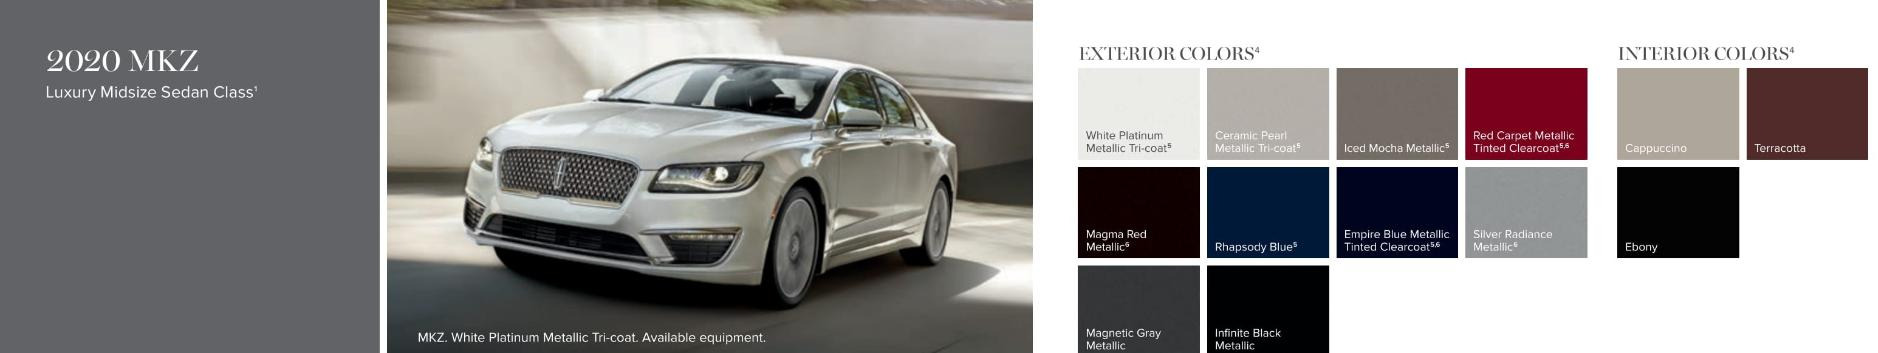 A paint chart showing the color options that the Lincoln MKZ came in for the 2020 year